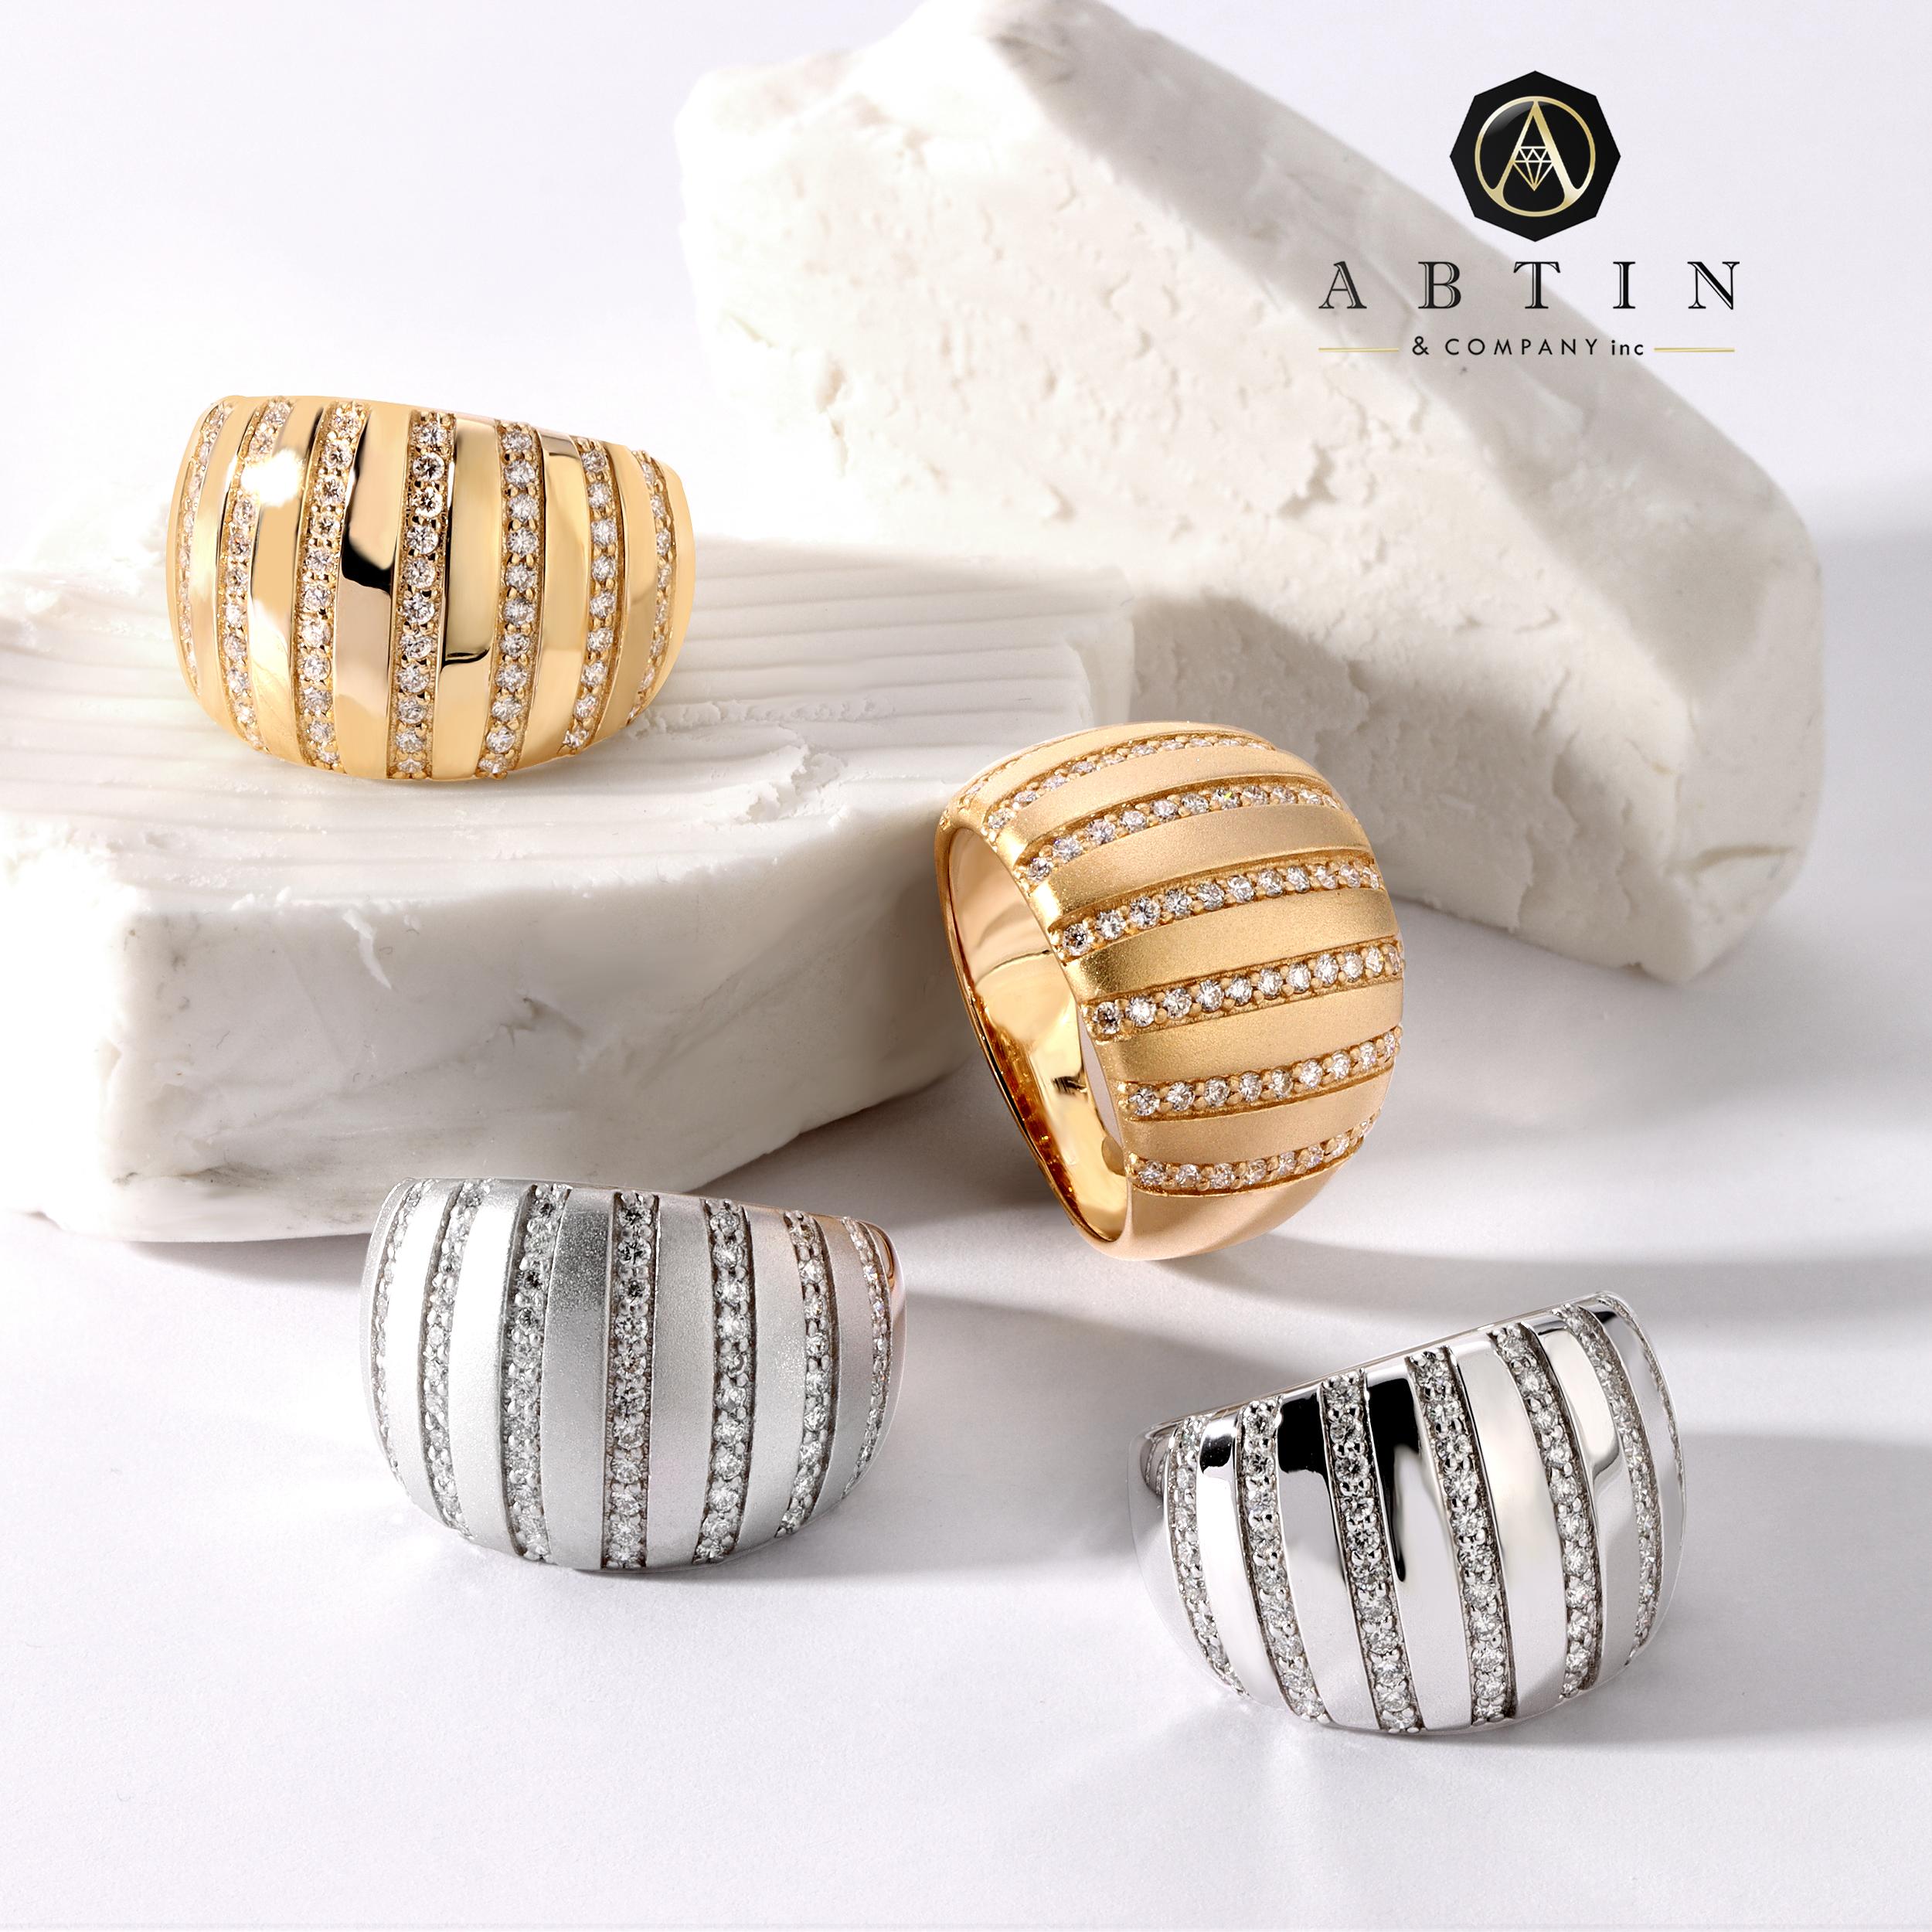 Crafted in 14K gold, this contemporary ring features stripe diamond studs softly rounding the golden surface in perfectly set rows of pave diamonds. The details on this ring is intricate and effortless. A must-have for fashion-forward modern women.